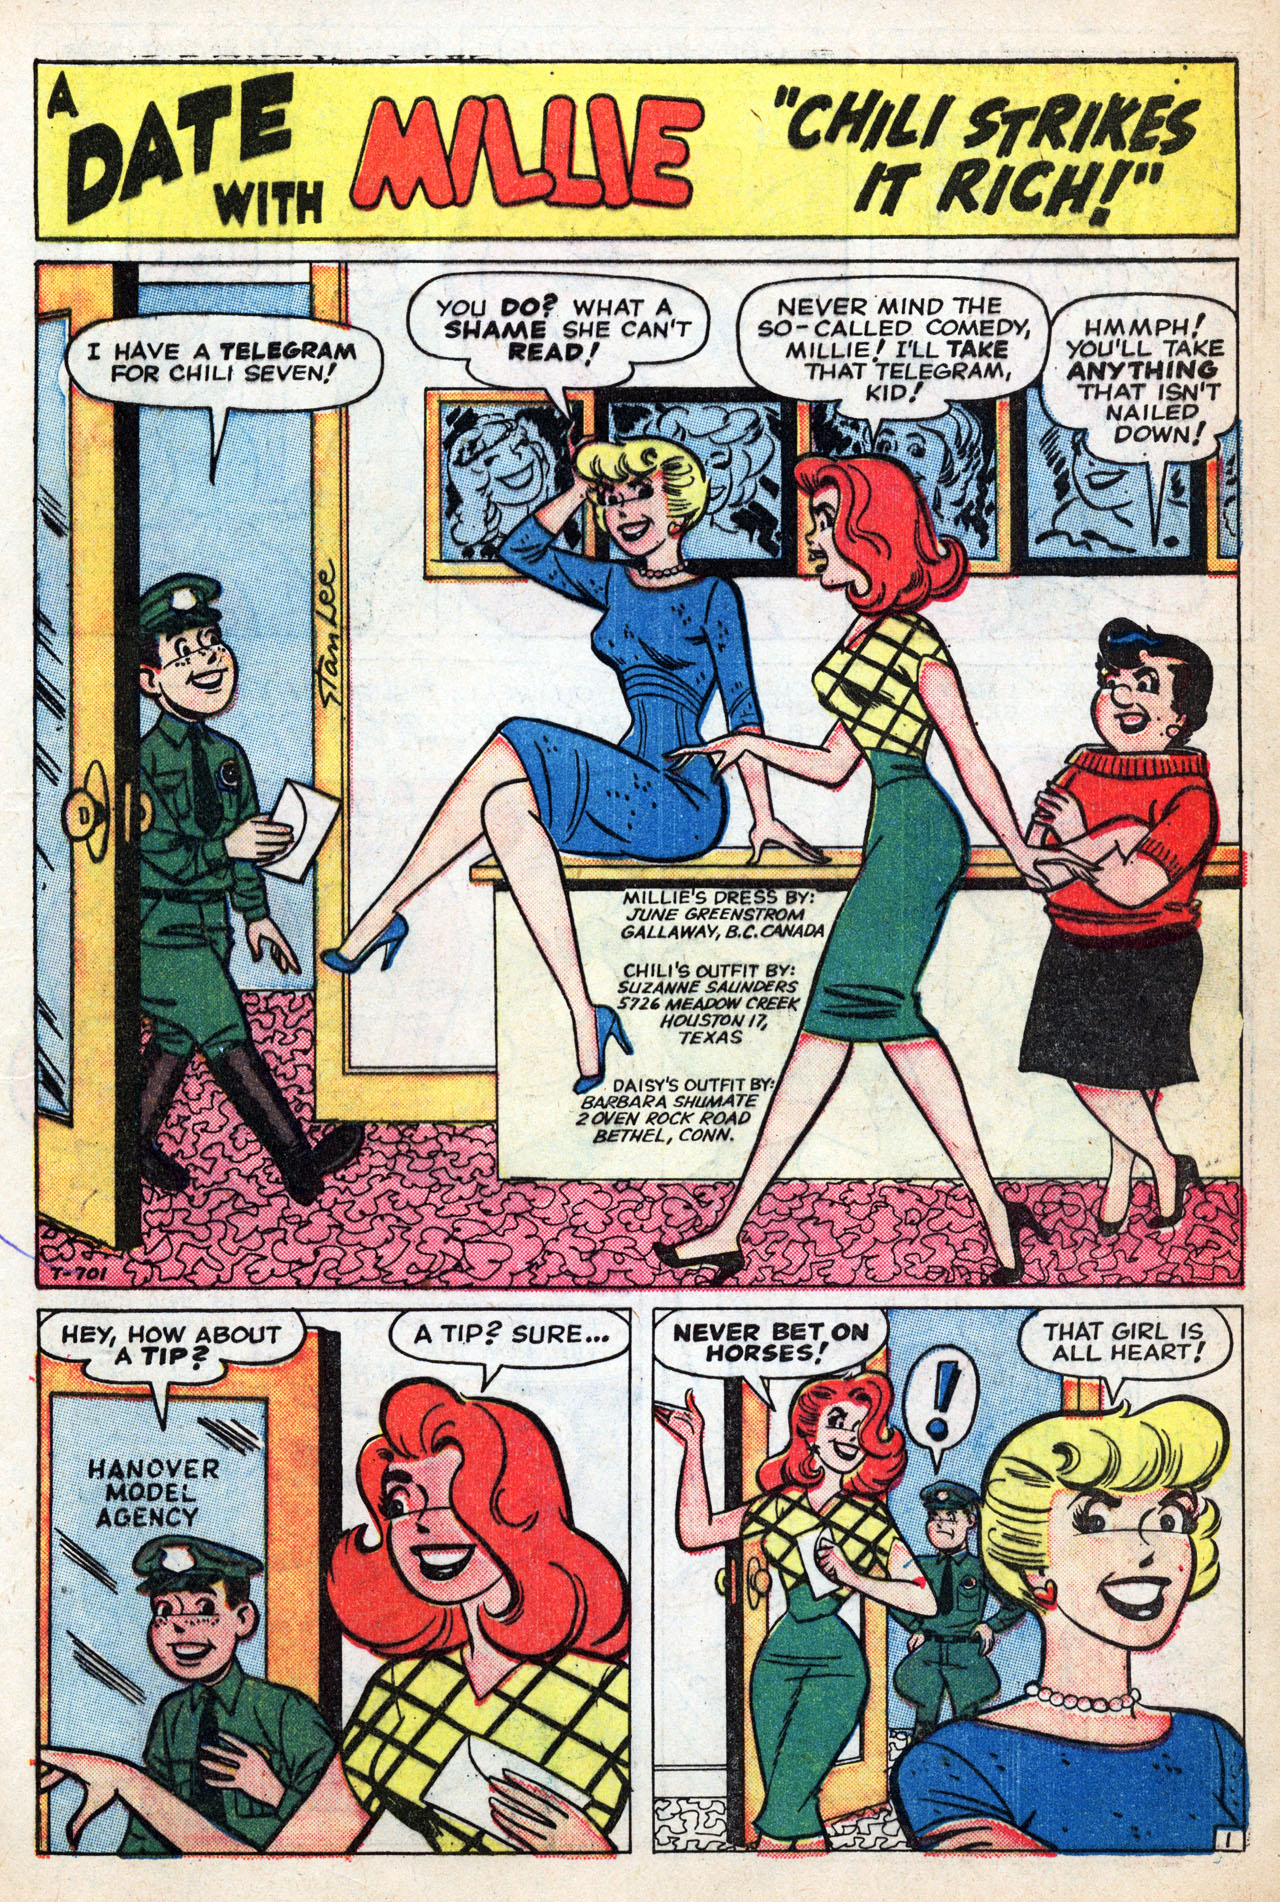 Read online A Date with Millie (1959) comic -  Issue #4 - 29